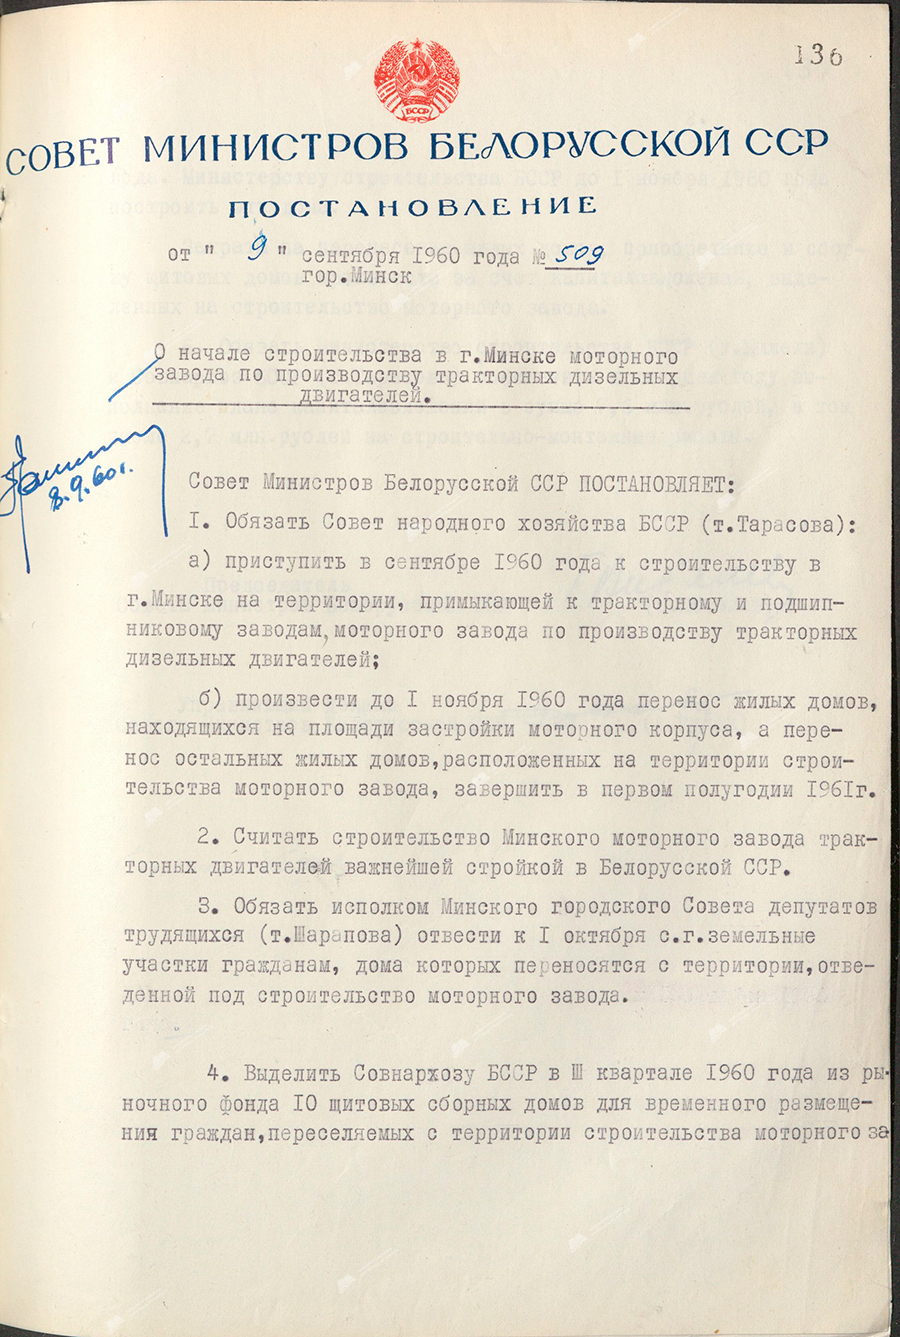 Resolution No. 509 of the Council of Ministers of the BSSR «On the start of construction in Minsk of a motor plant for the production of tractor diesel engines»-с. 0